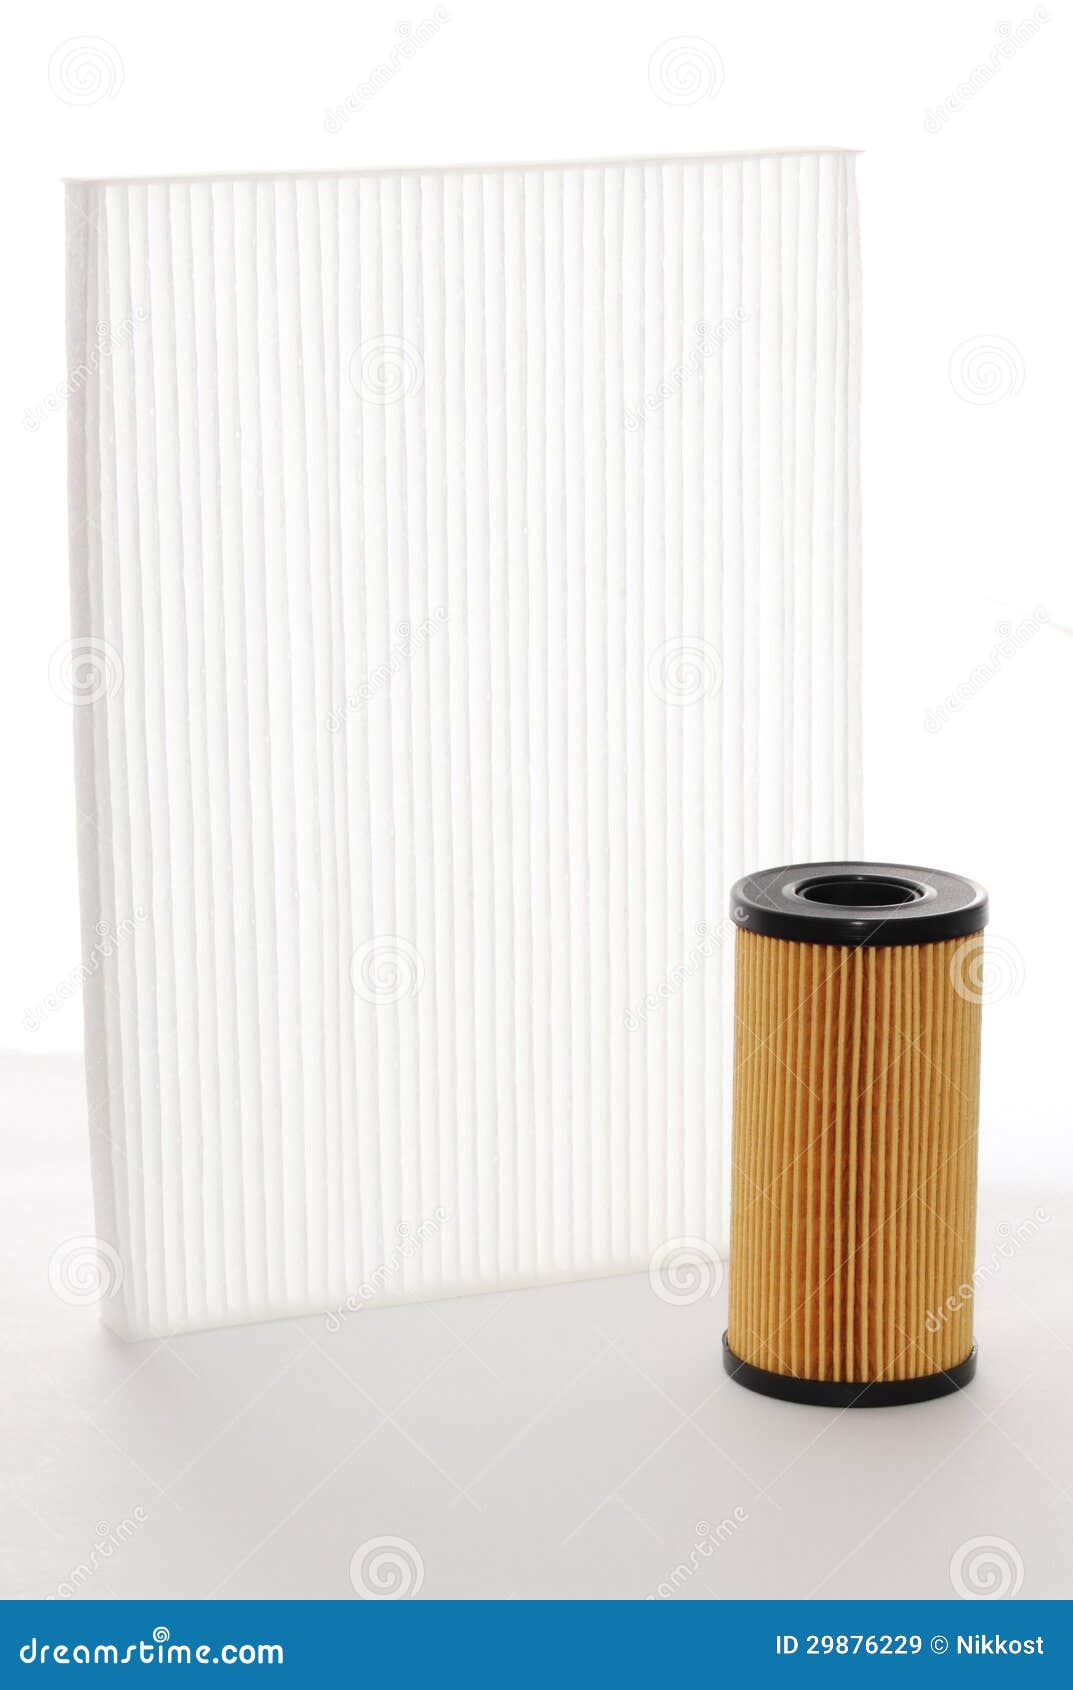 air filter and oil filter cartridge